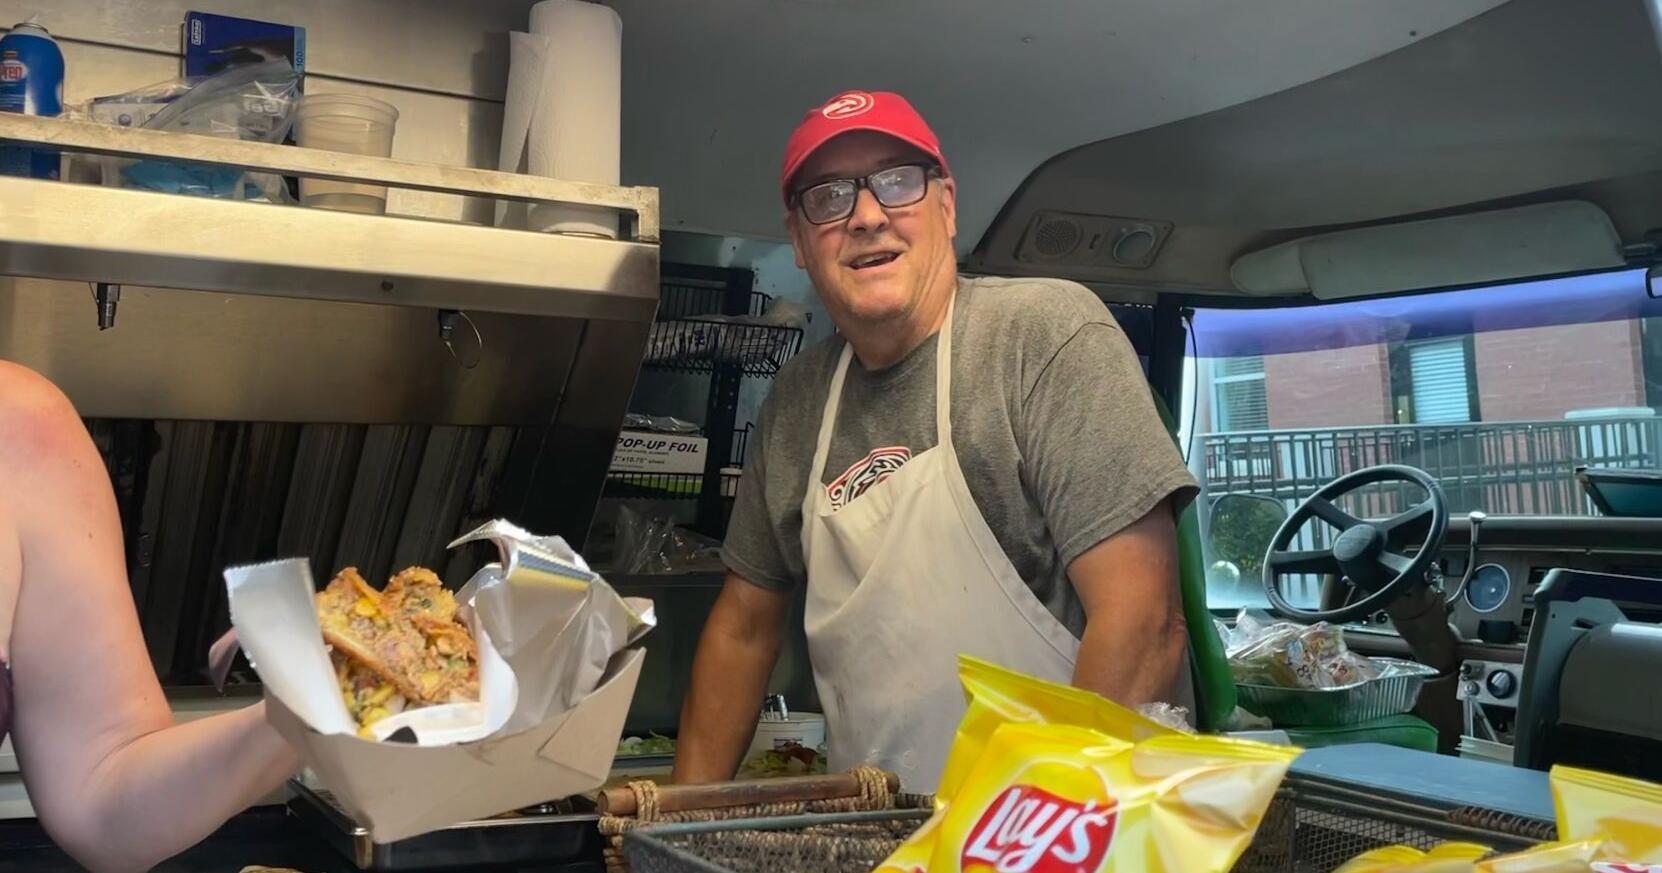 Food trucks offer cuisine, connection at Alpharetta monthly event